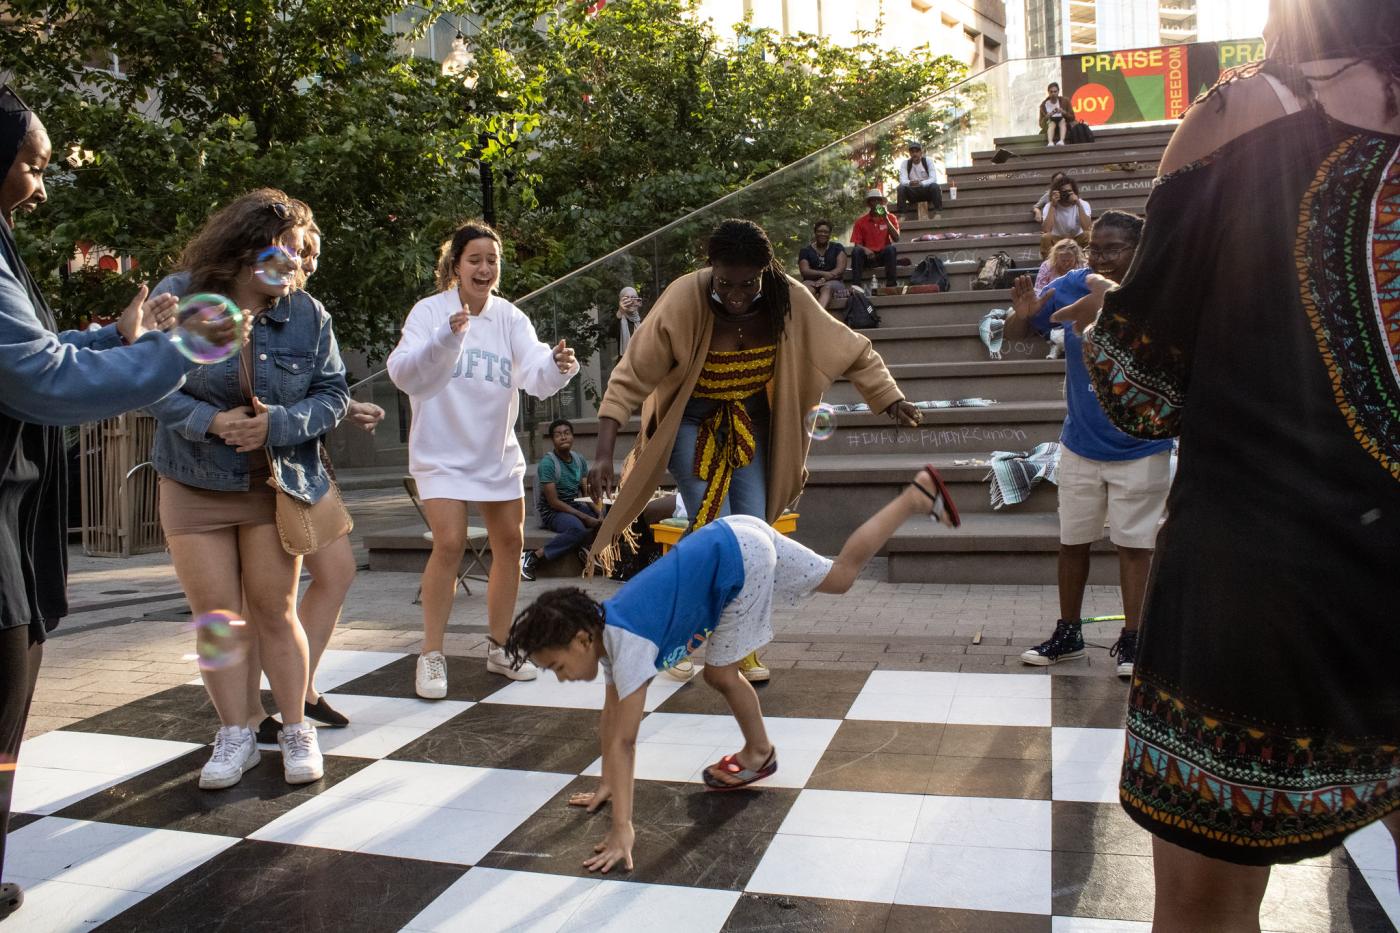 In a circle of folks, a young Black boy does a hand stand on top of a black and white checker board ground.